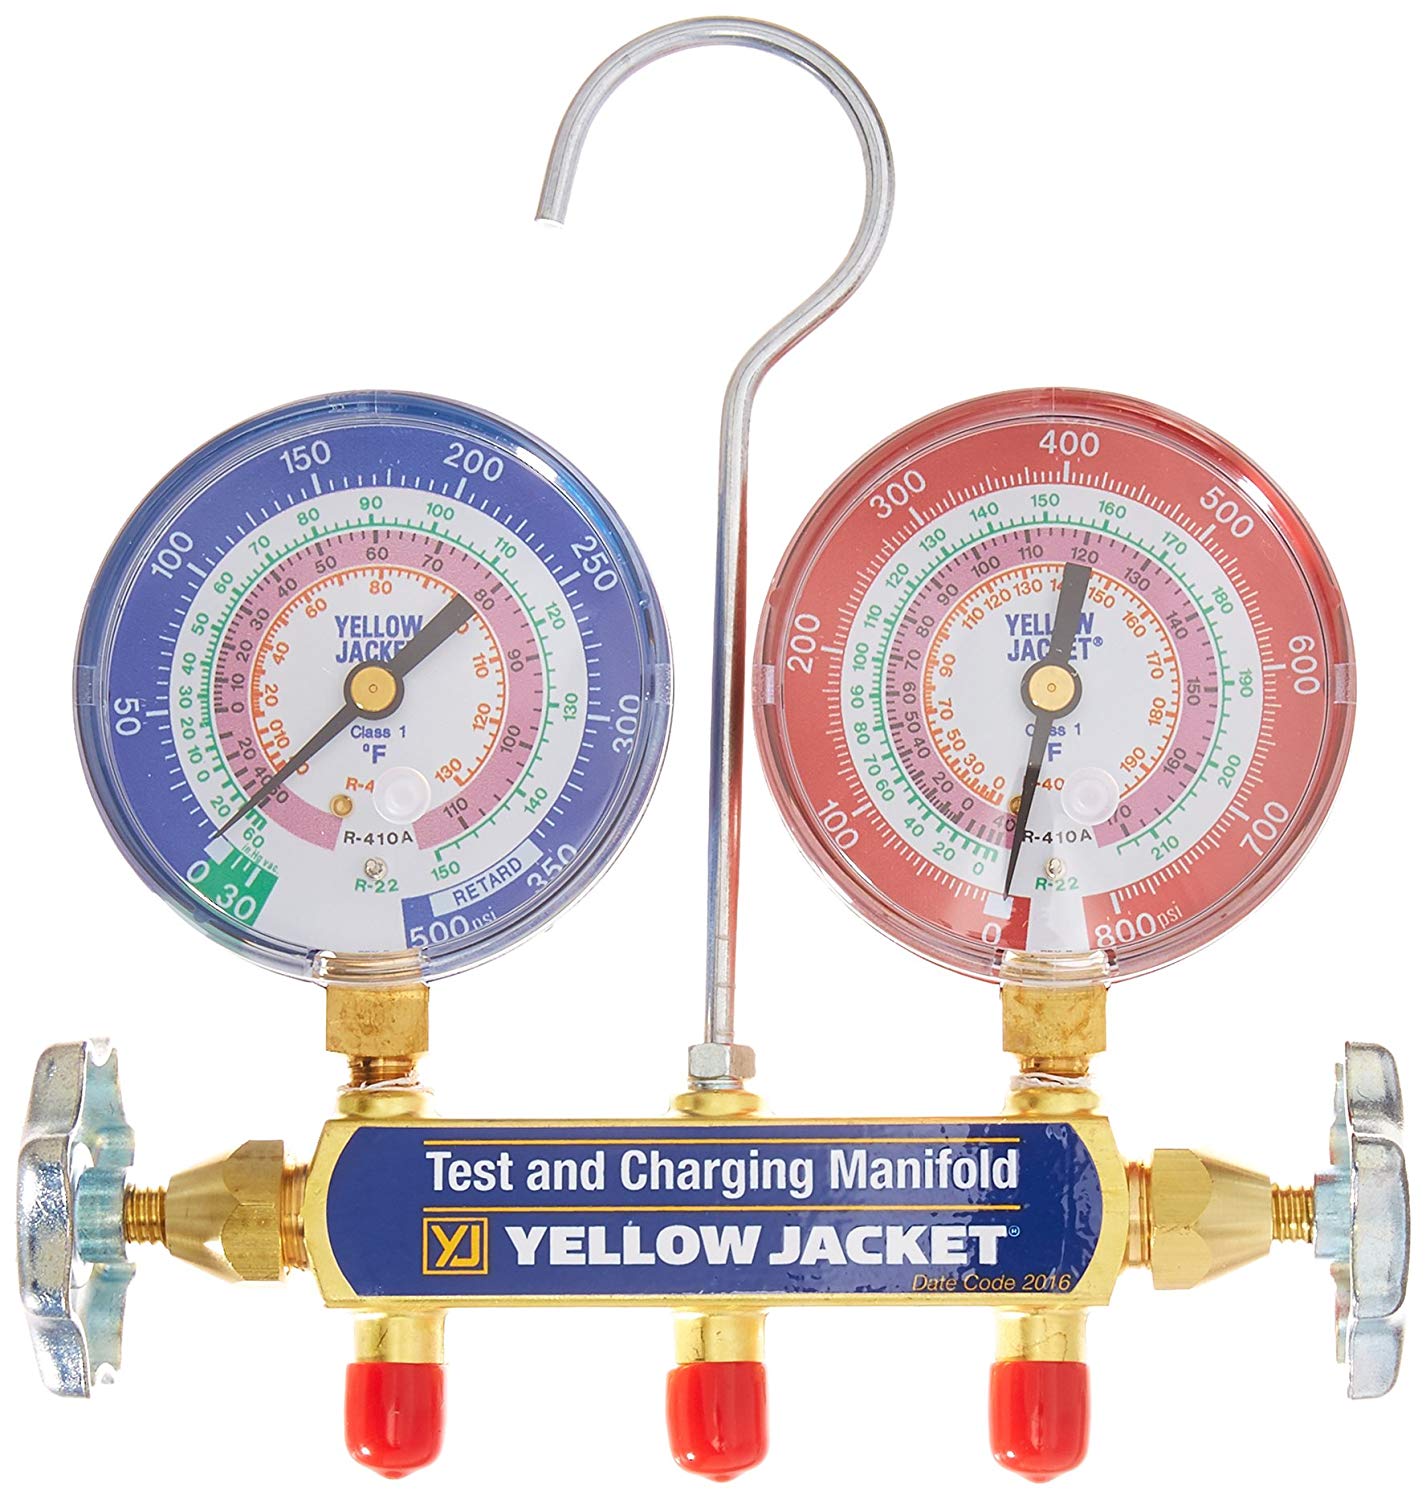 R-410A Yellow Jacket 41863 Manifold with 5/16-1/4-5/16 and 1/4 Service Fittings kPa/psi Red/Blue Gauge 